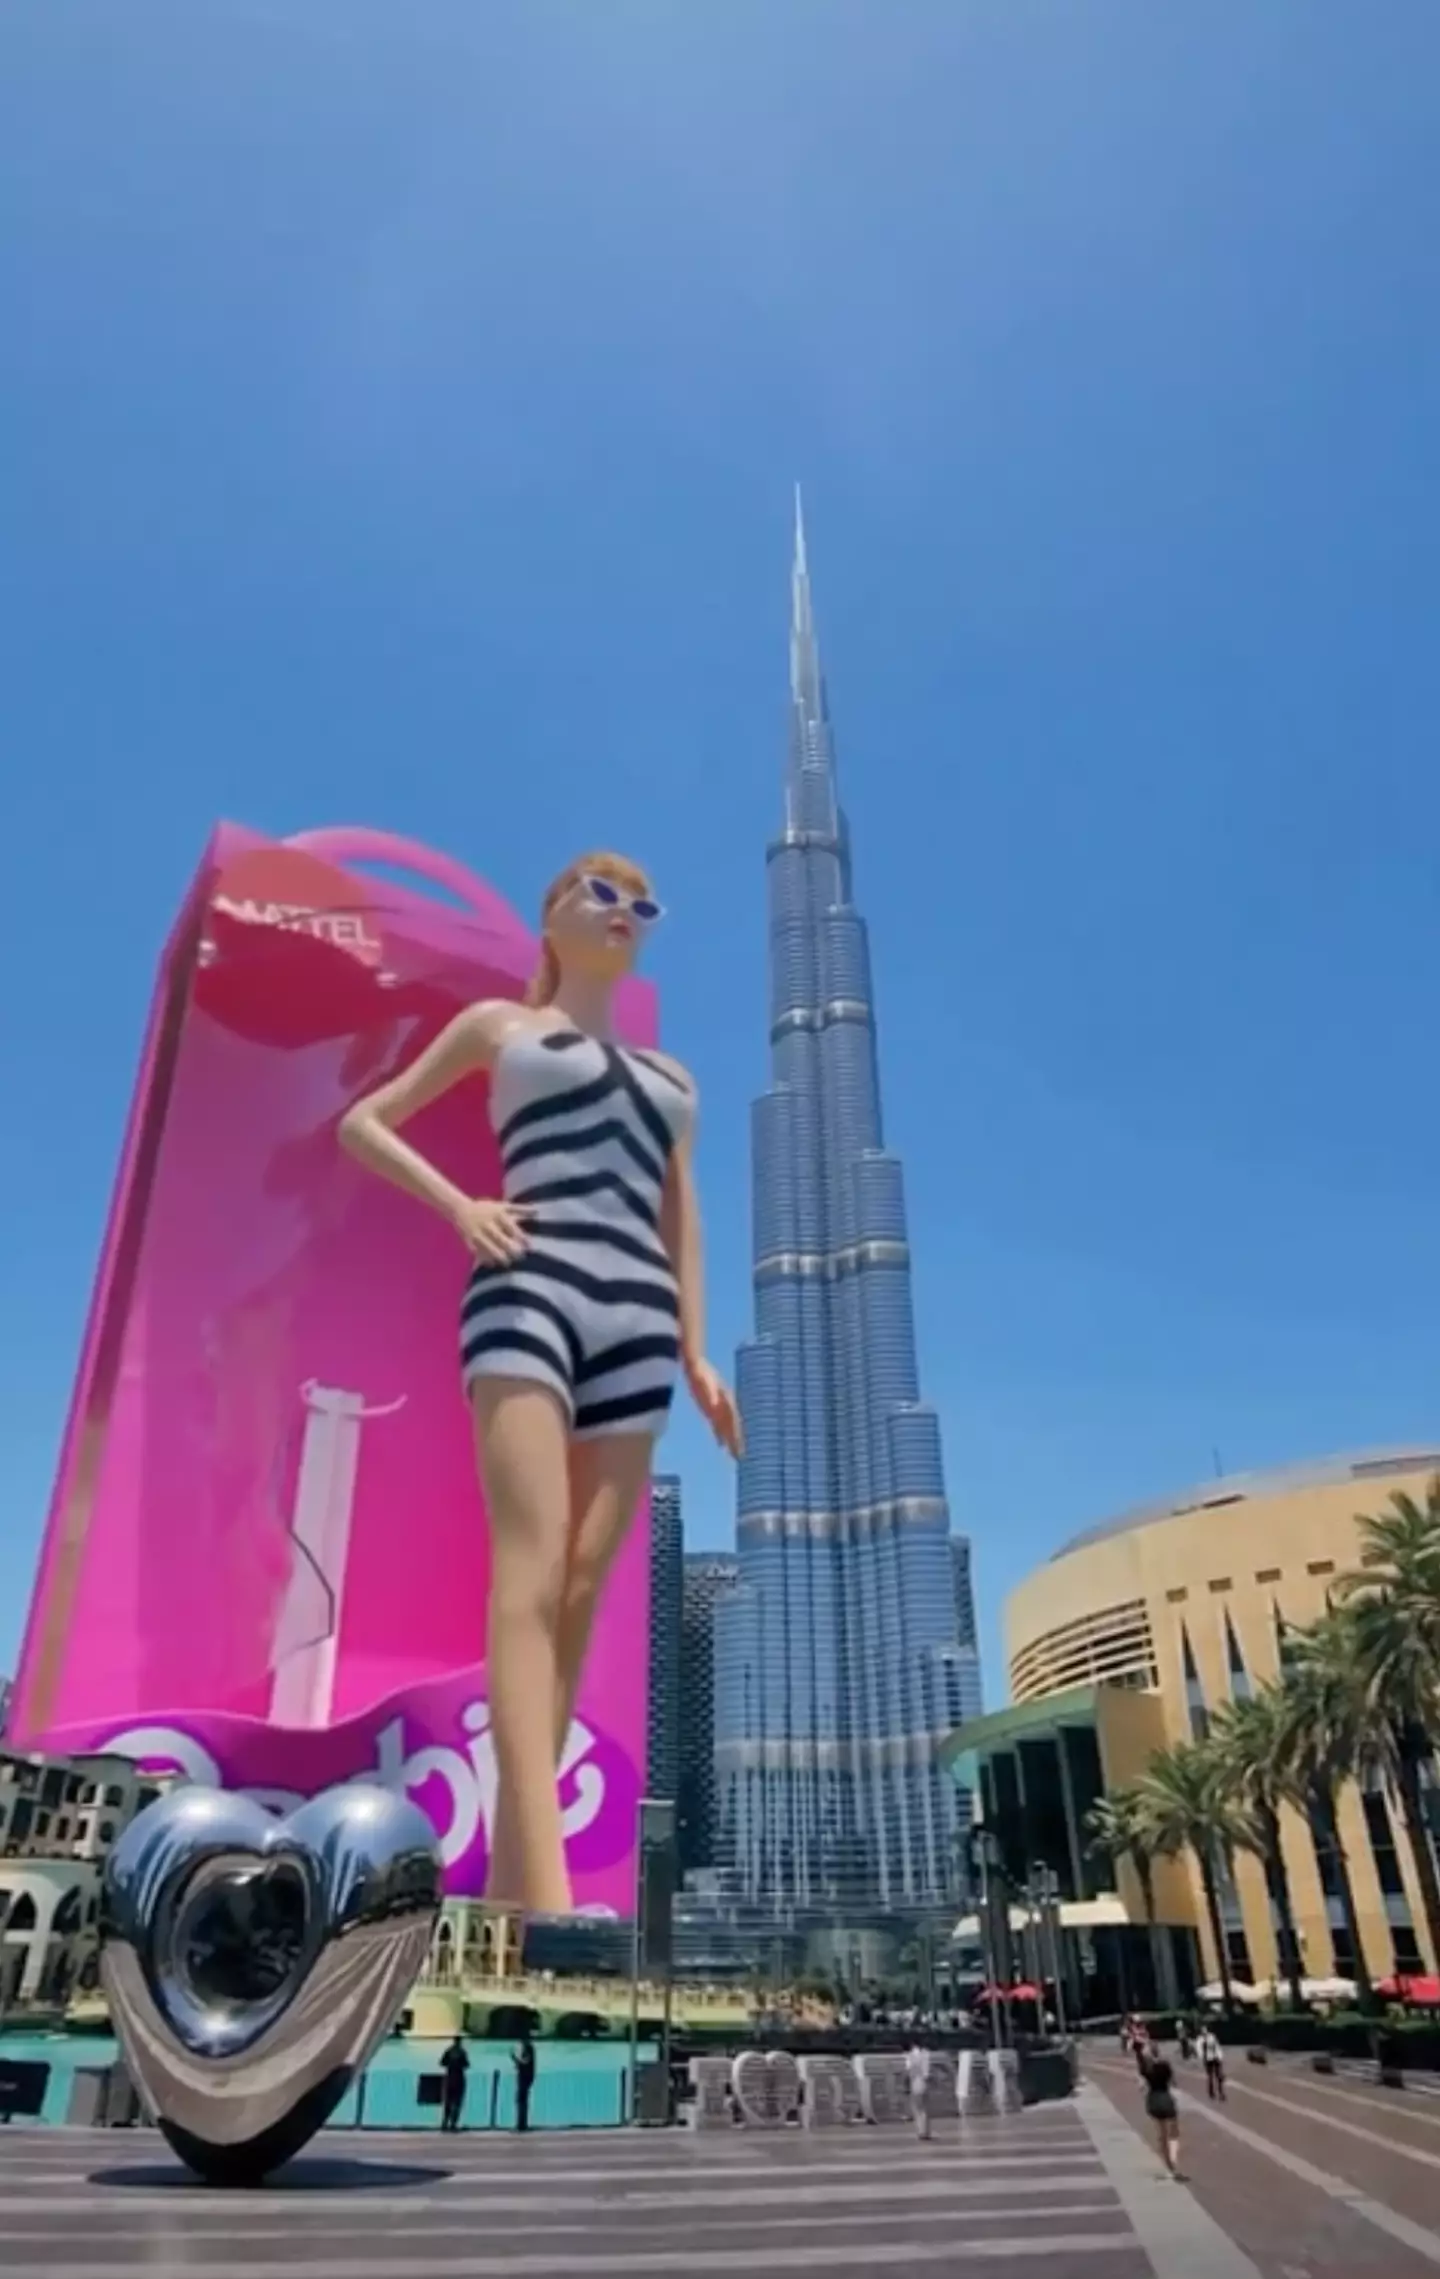 The short clip has gone viral as hype builds for Barbie in the UAE.